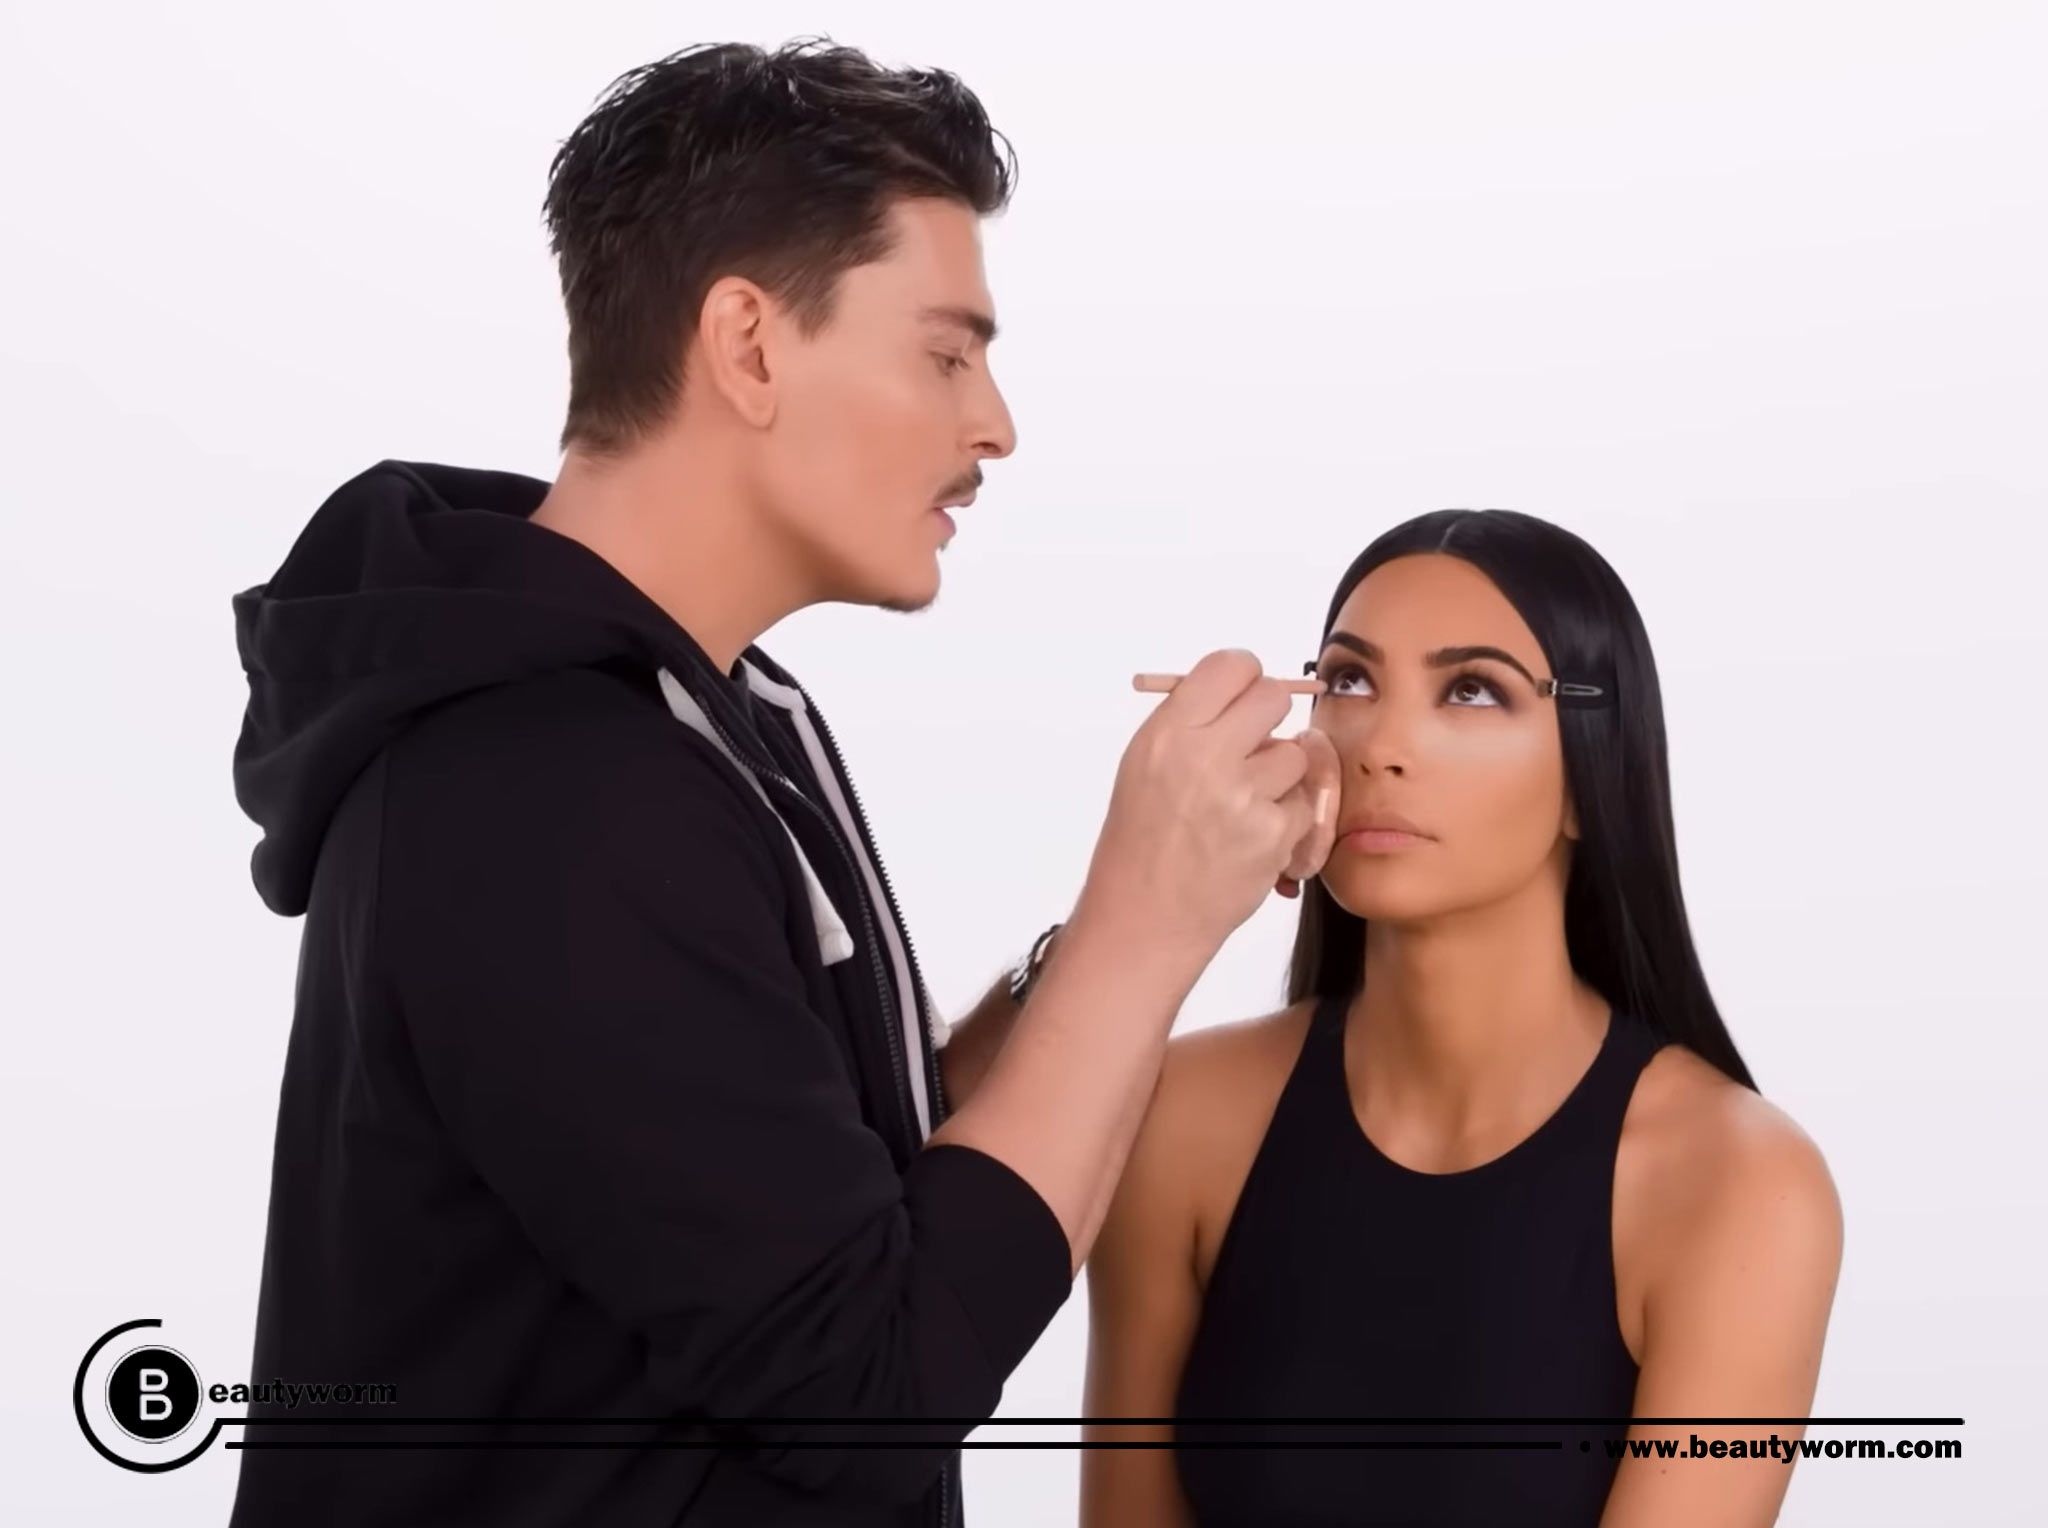 Creating a smokey eye like Kim Kardashian's requires practice and patience. However, with the right technique, anyone can achieve this glamorous look.